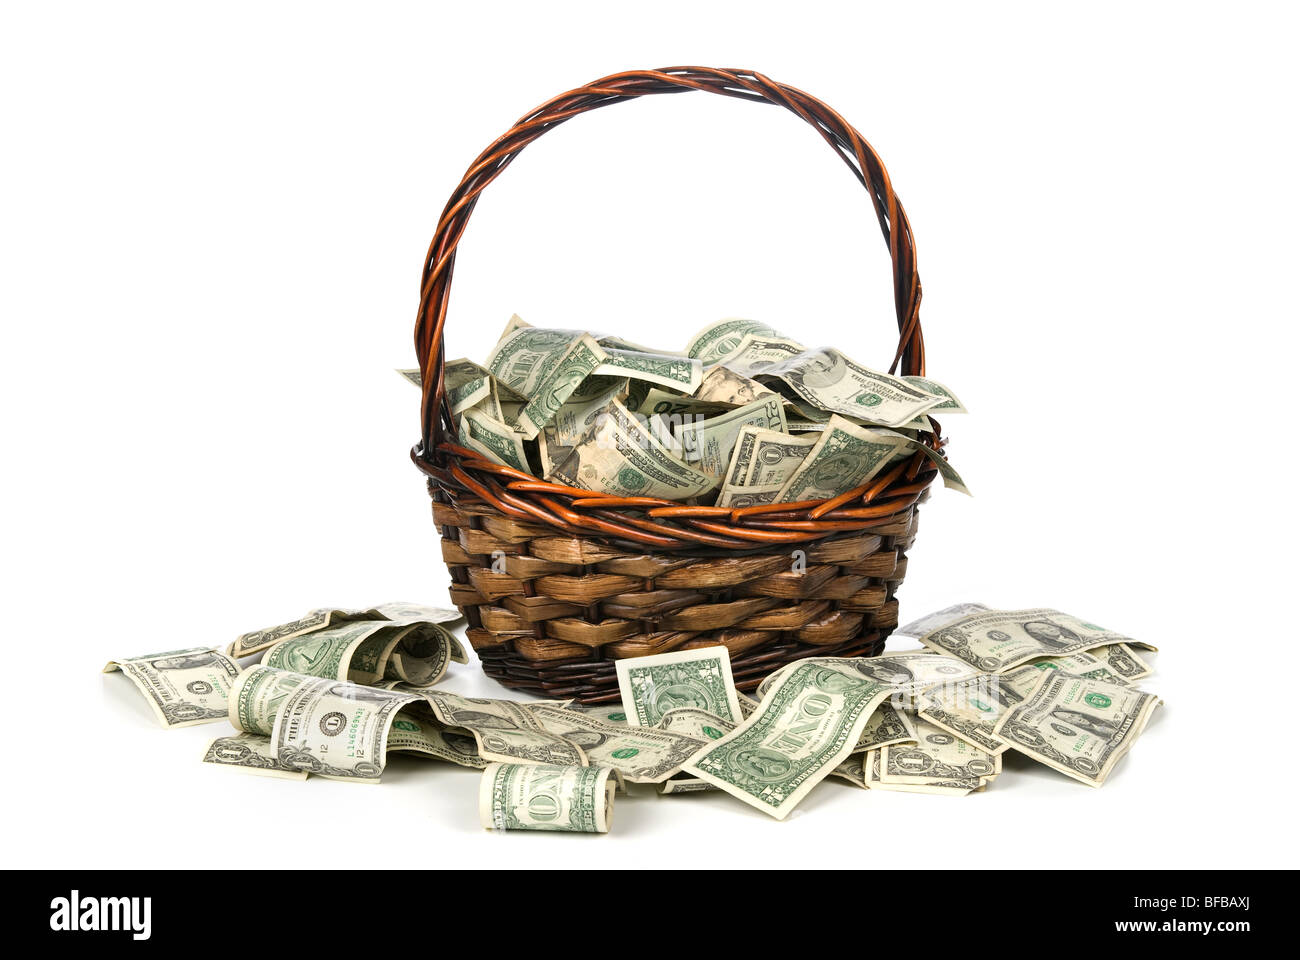 A wicker basket with handle holds a pile of cash. Good for most financial inferences Stock Photo